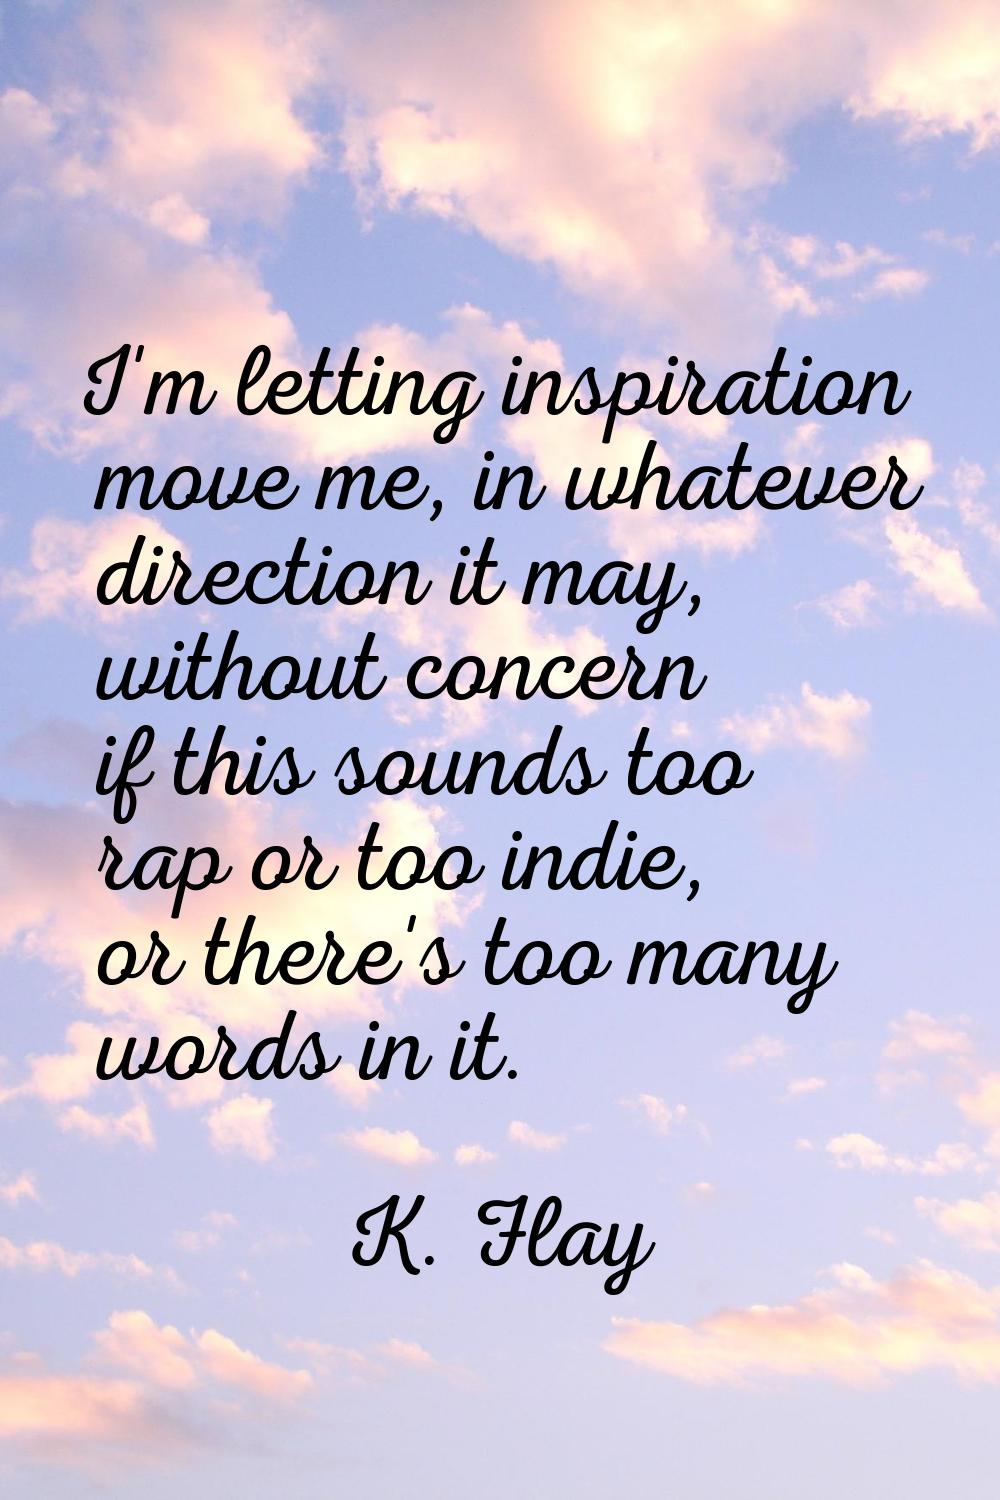 I'm letting inspiration move me, in whatever direction it may, without concern if this sounds too r